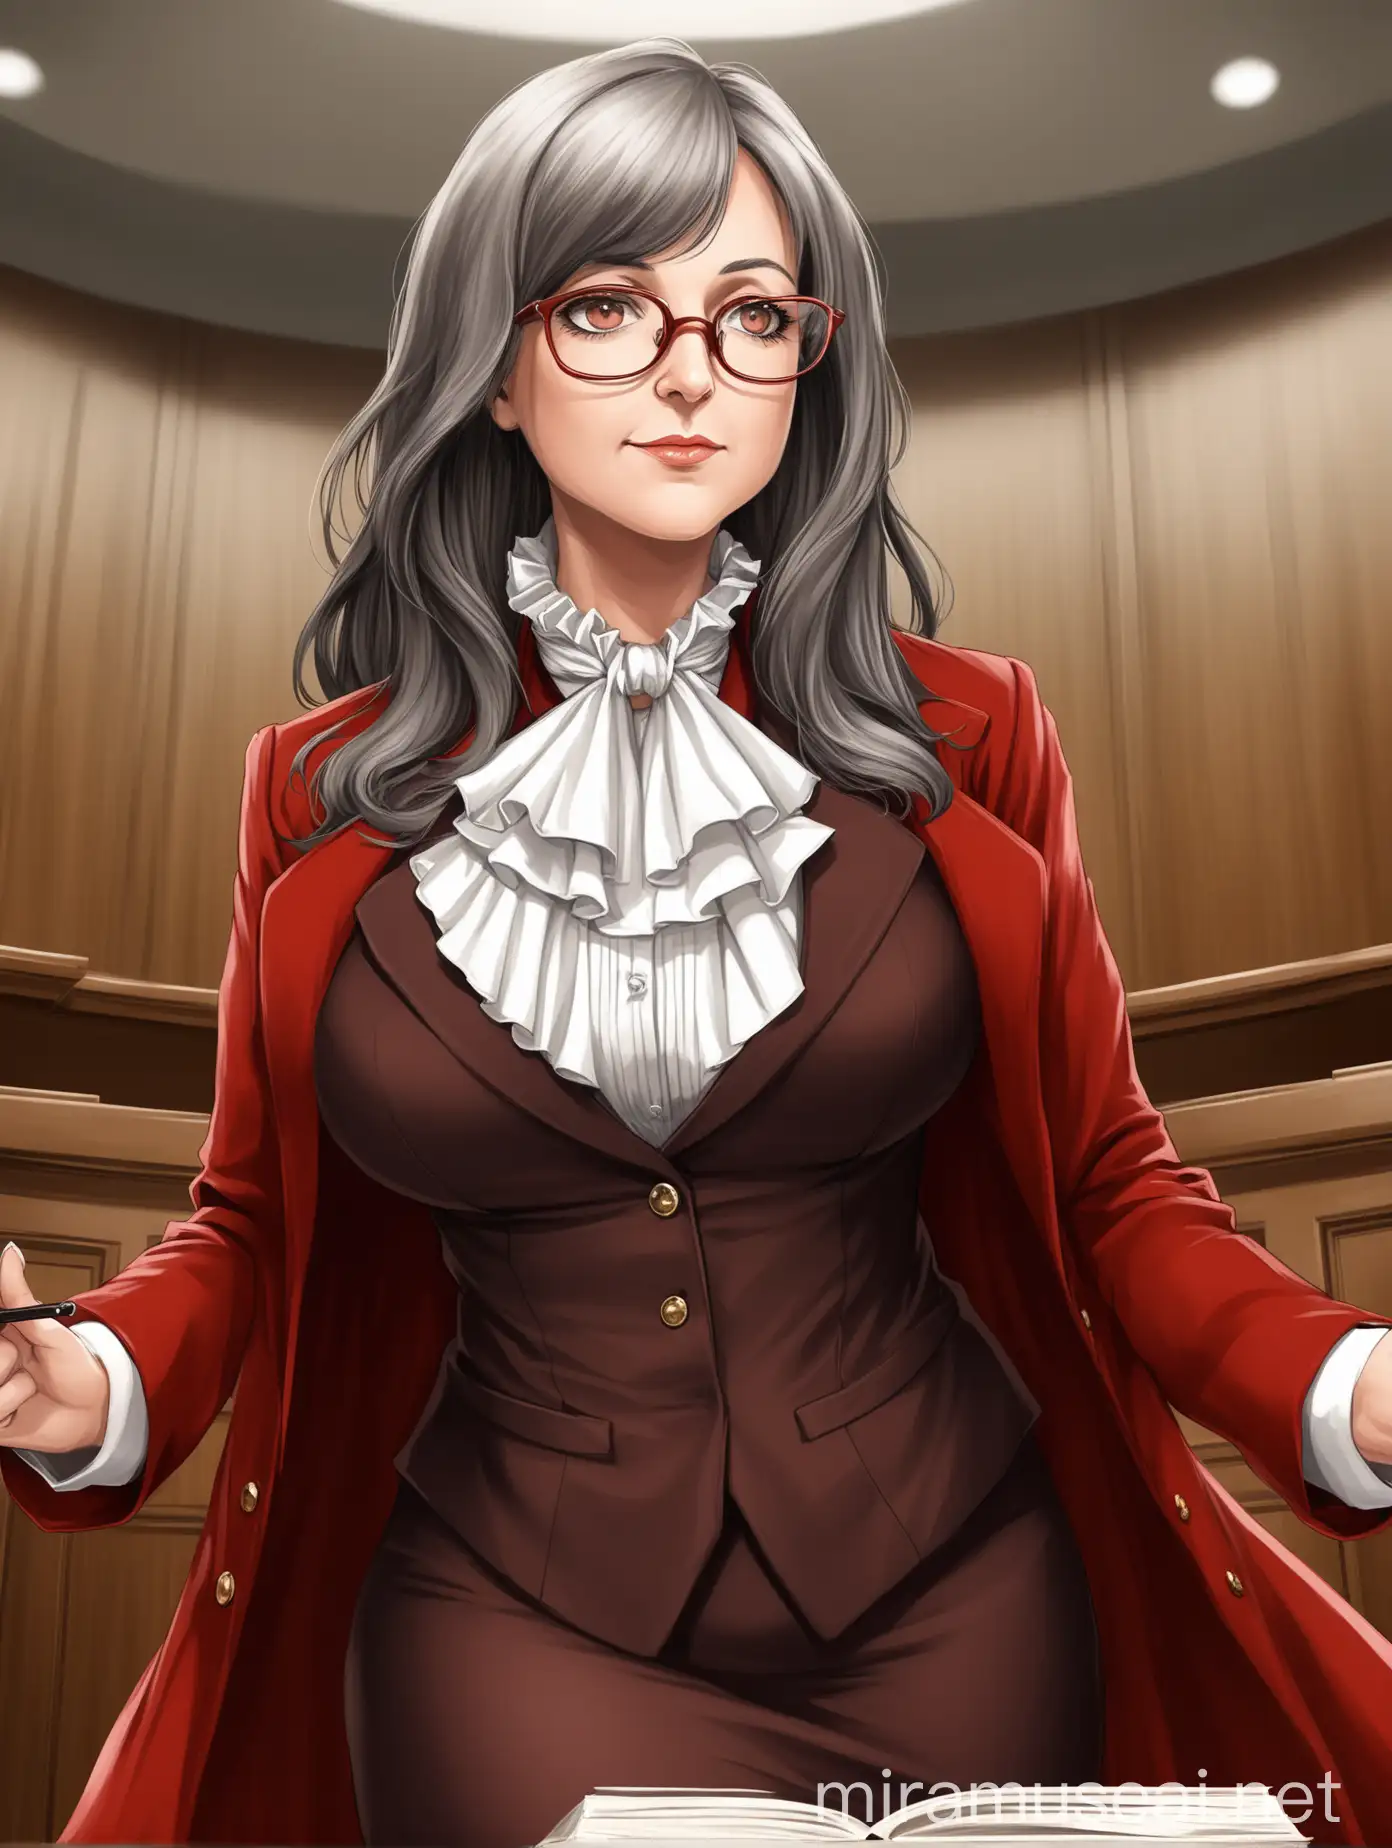 A beautiful mature woman; in her 30s; with a long dark greyish-brown styled hair with prominent fringes, grayish foxy eyes, a slightly curvy figure; she is wearing a red skirtsuit with a long red coat, white dress shirt, brown pantyhose, black elegant vest, a white ruffled jabot tied around her neck and a pair of reading glasses; she is a prosecutor in a court room; below angle 